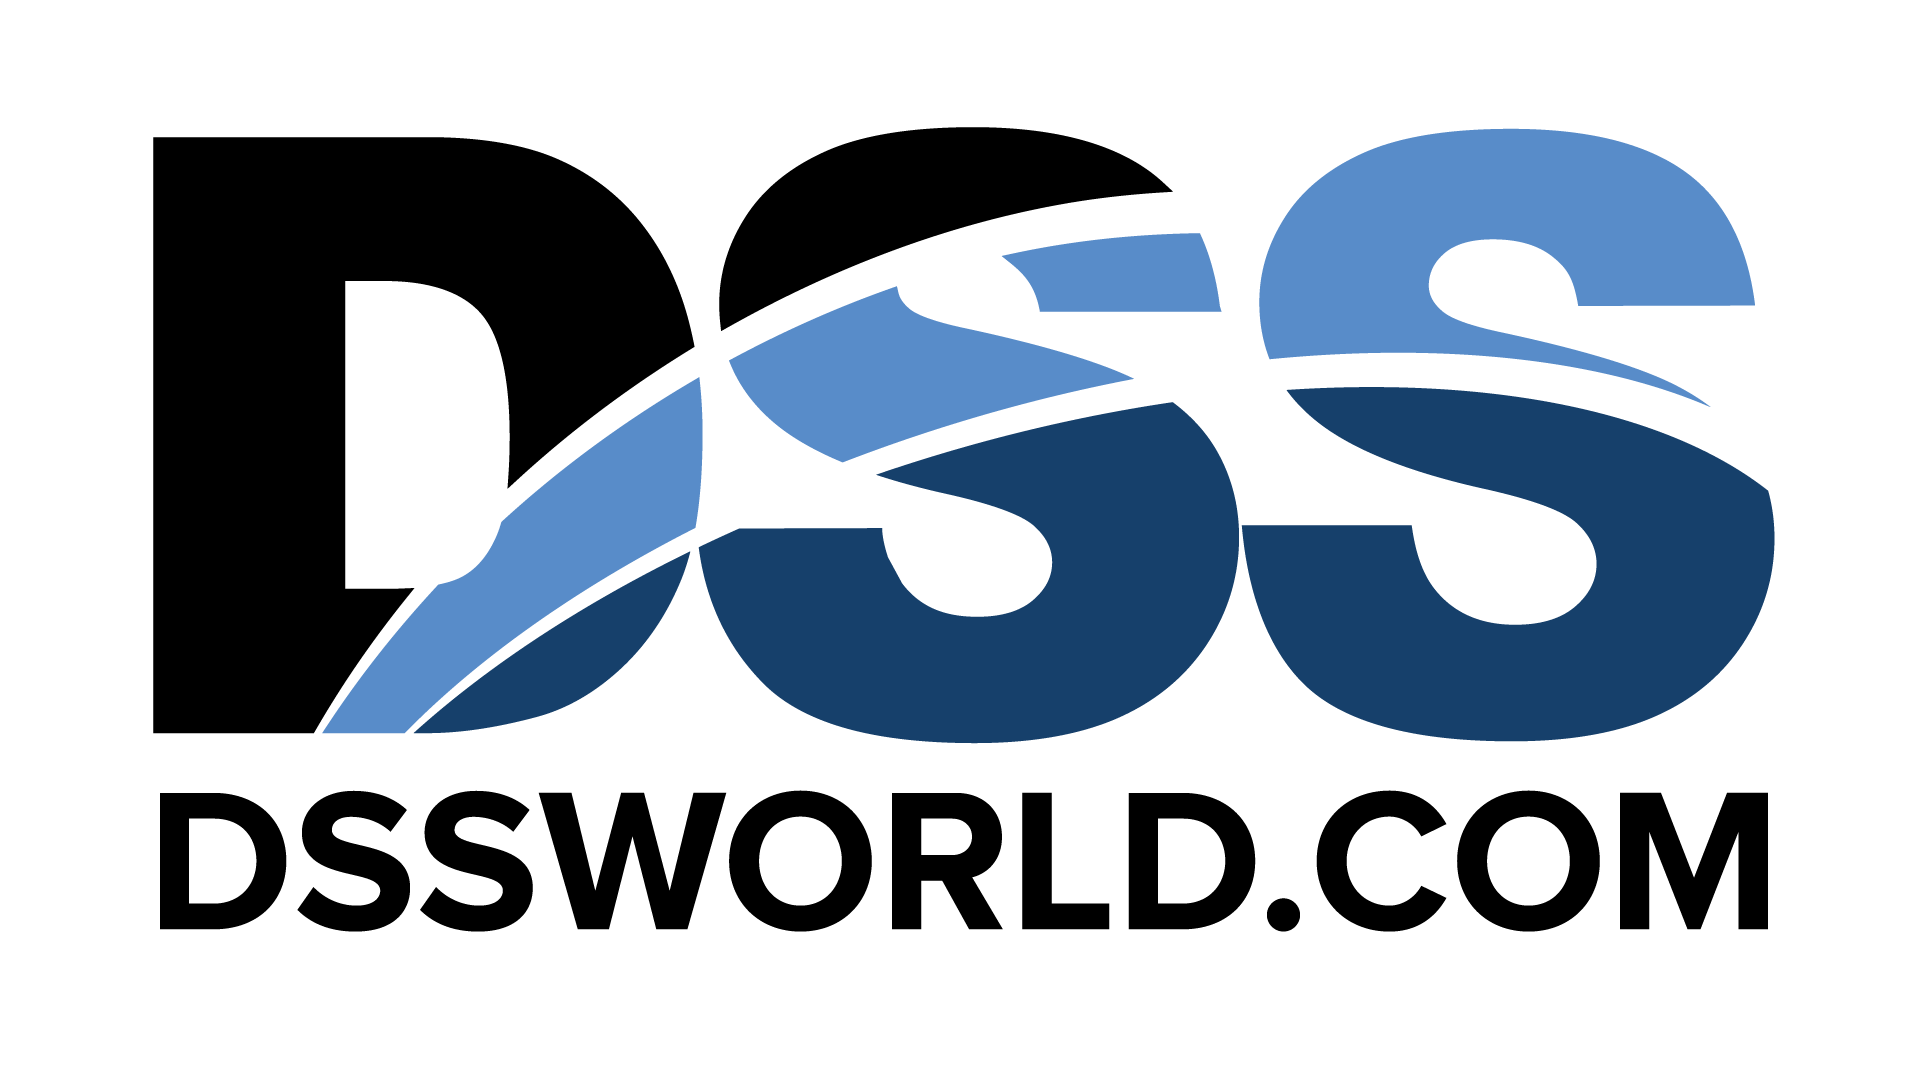 DSS, Inc. Announces Filing of Registration Statement on Form S-1 for Initial Public Offering of Impact Biomedical